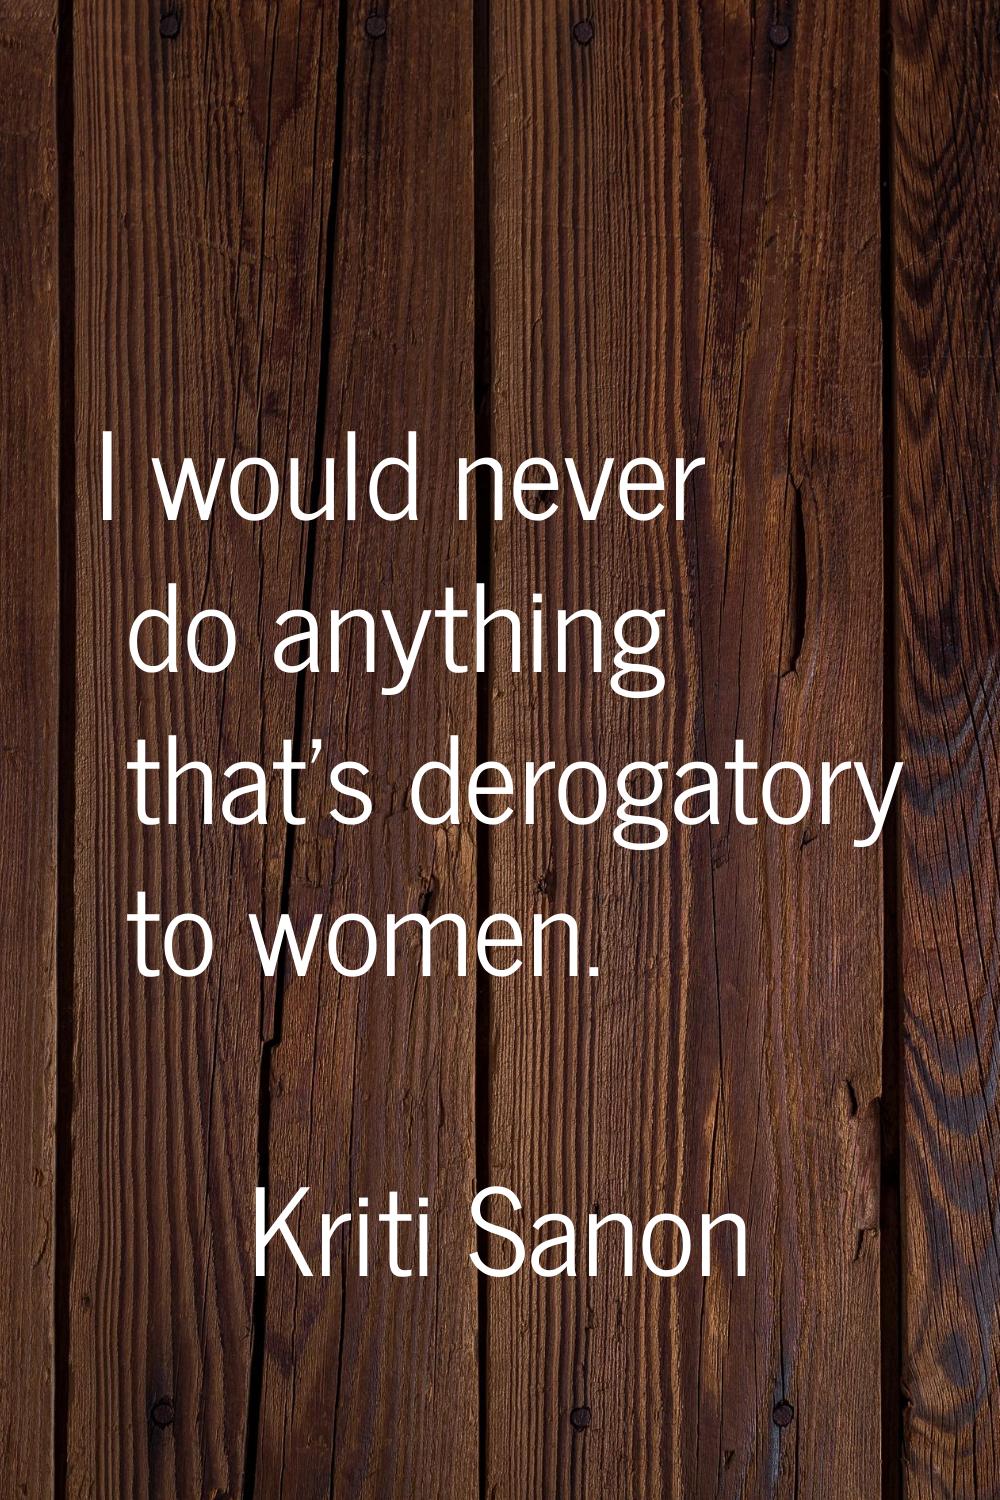 I would never do anything that's derogatory to women.